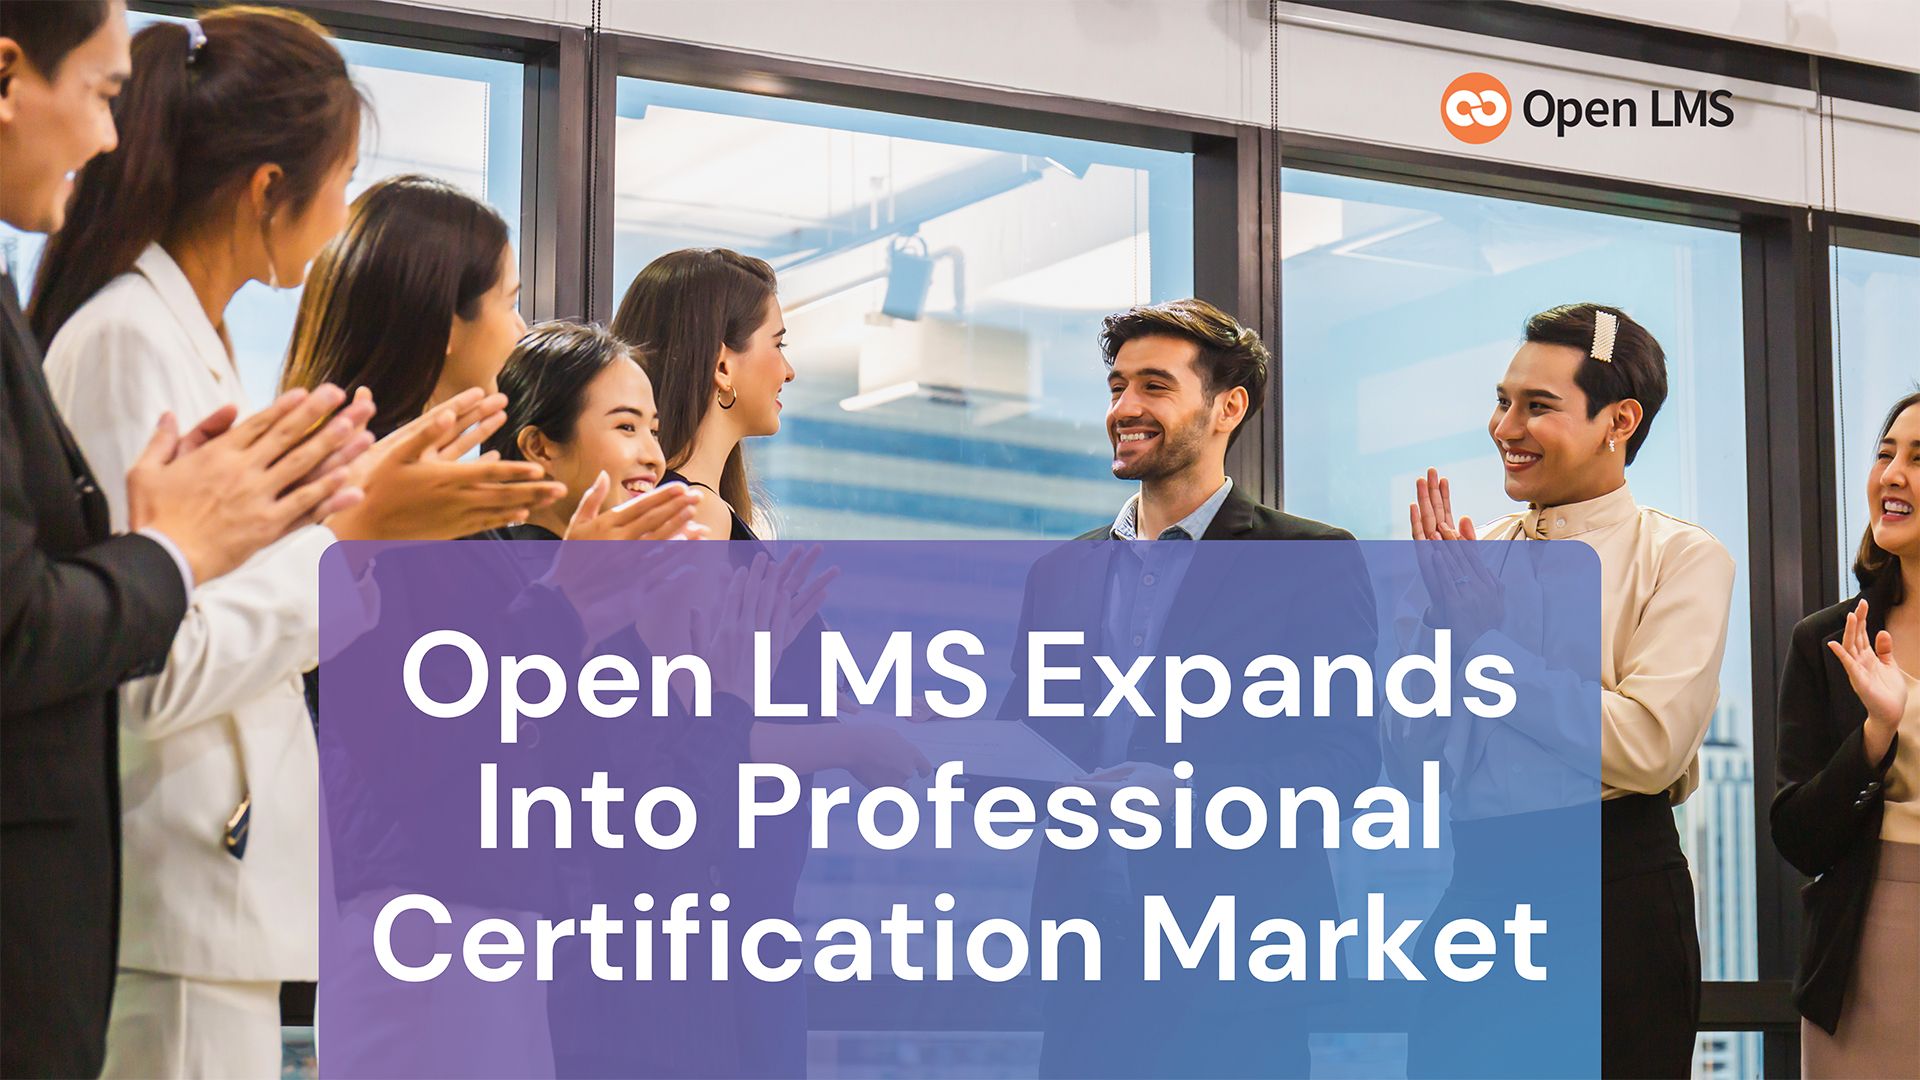 Open LMS Partners With Copyleaks, Adding Advanced AI-Driven Plagiarism and  AI Content Detection - Learning News